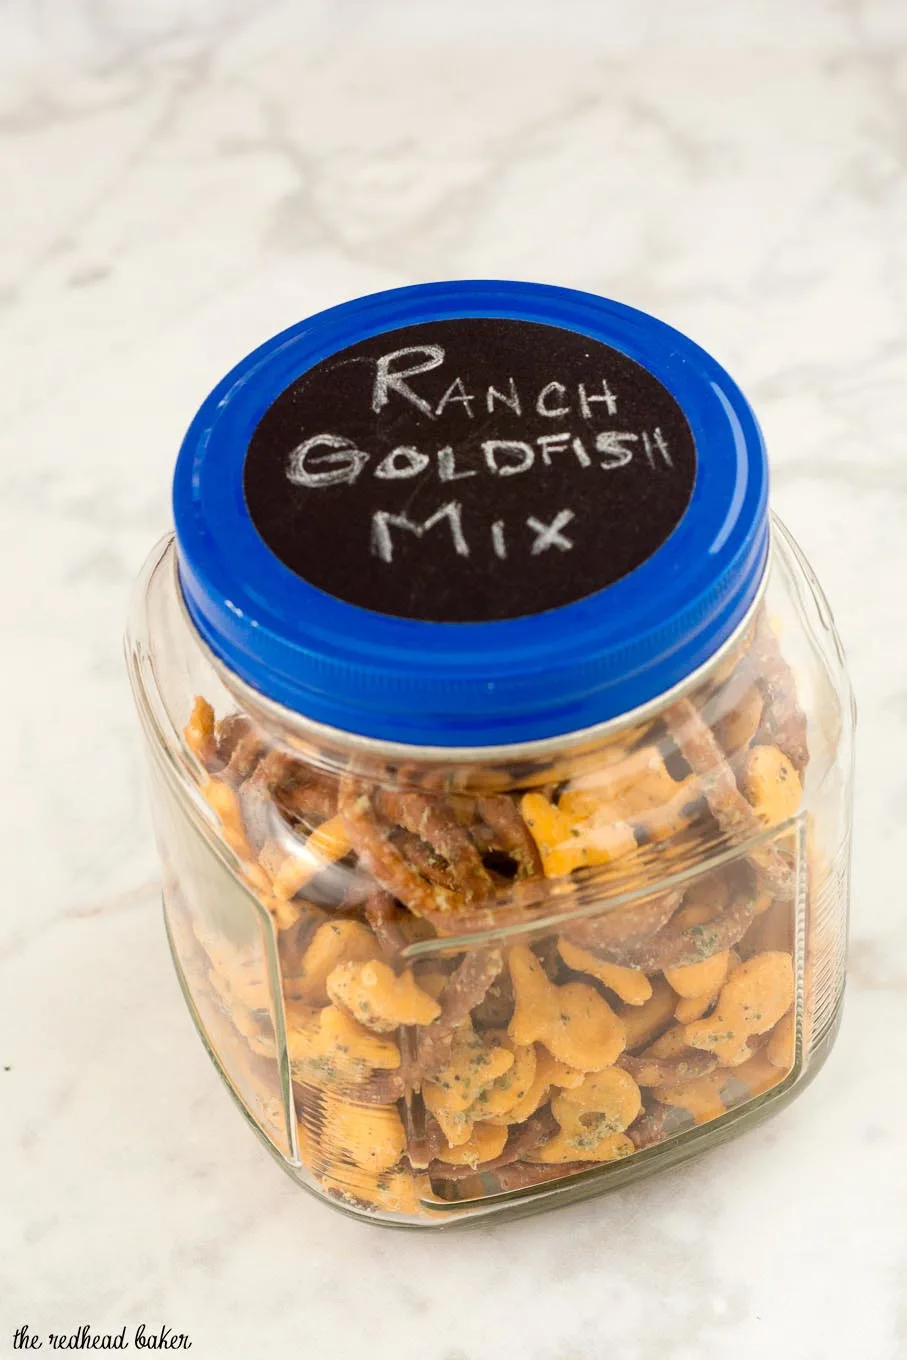 Back-to-school is a busy time. Snack smarter with Ranch Goldfish® Snack Mix, perfect for after-school or on-the-go. #MixMatchMunch #ad